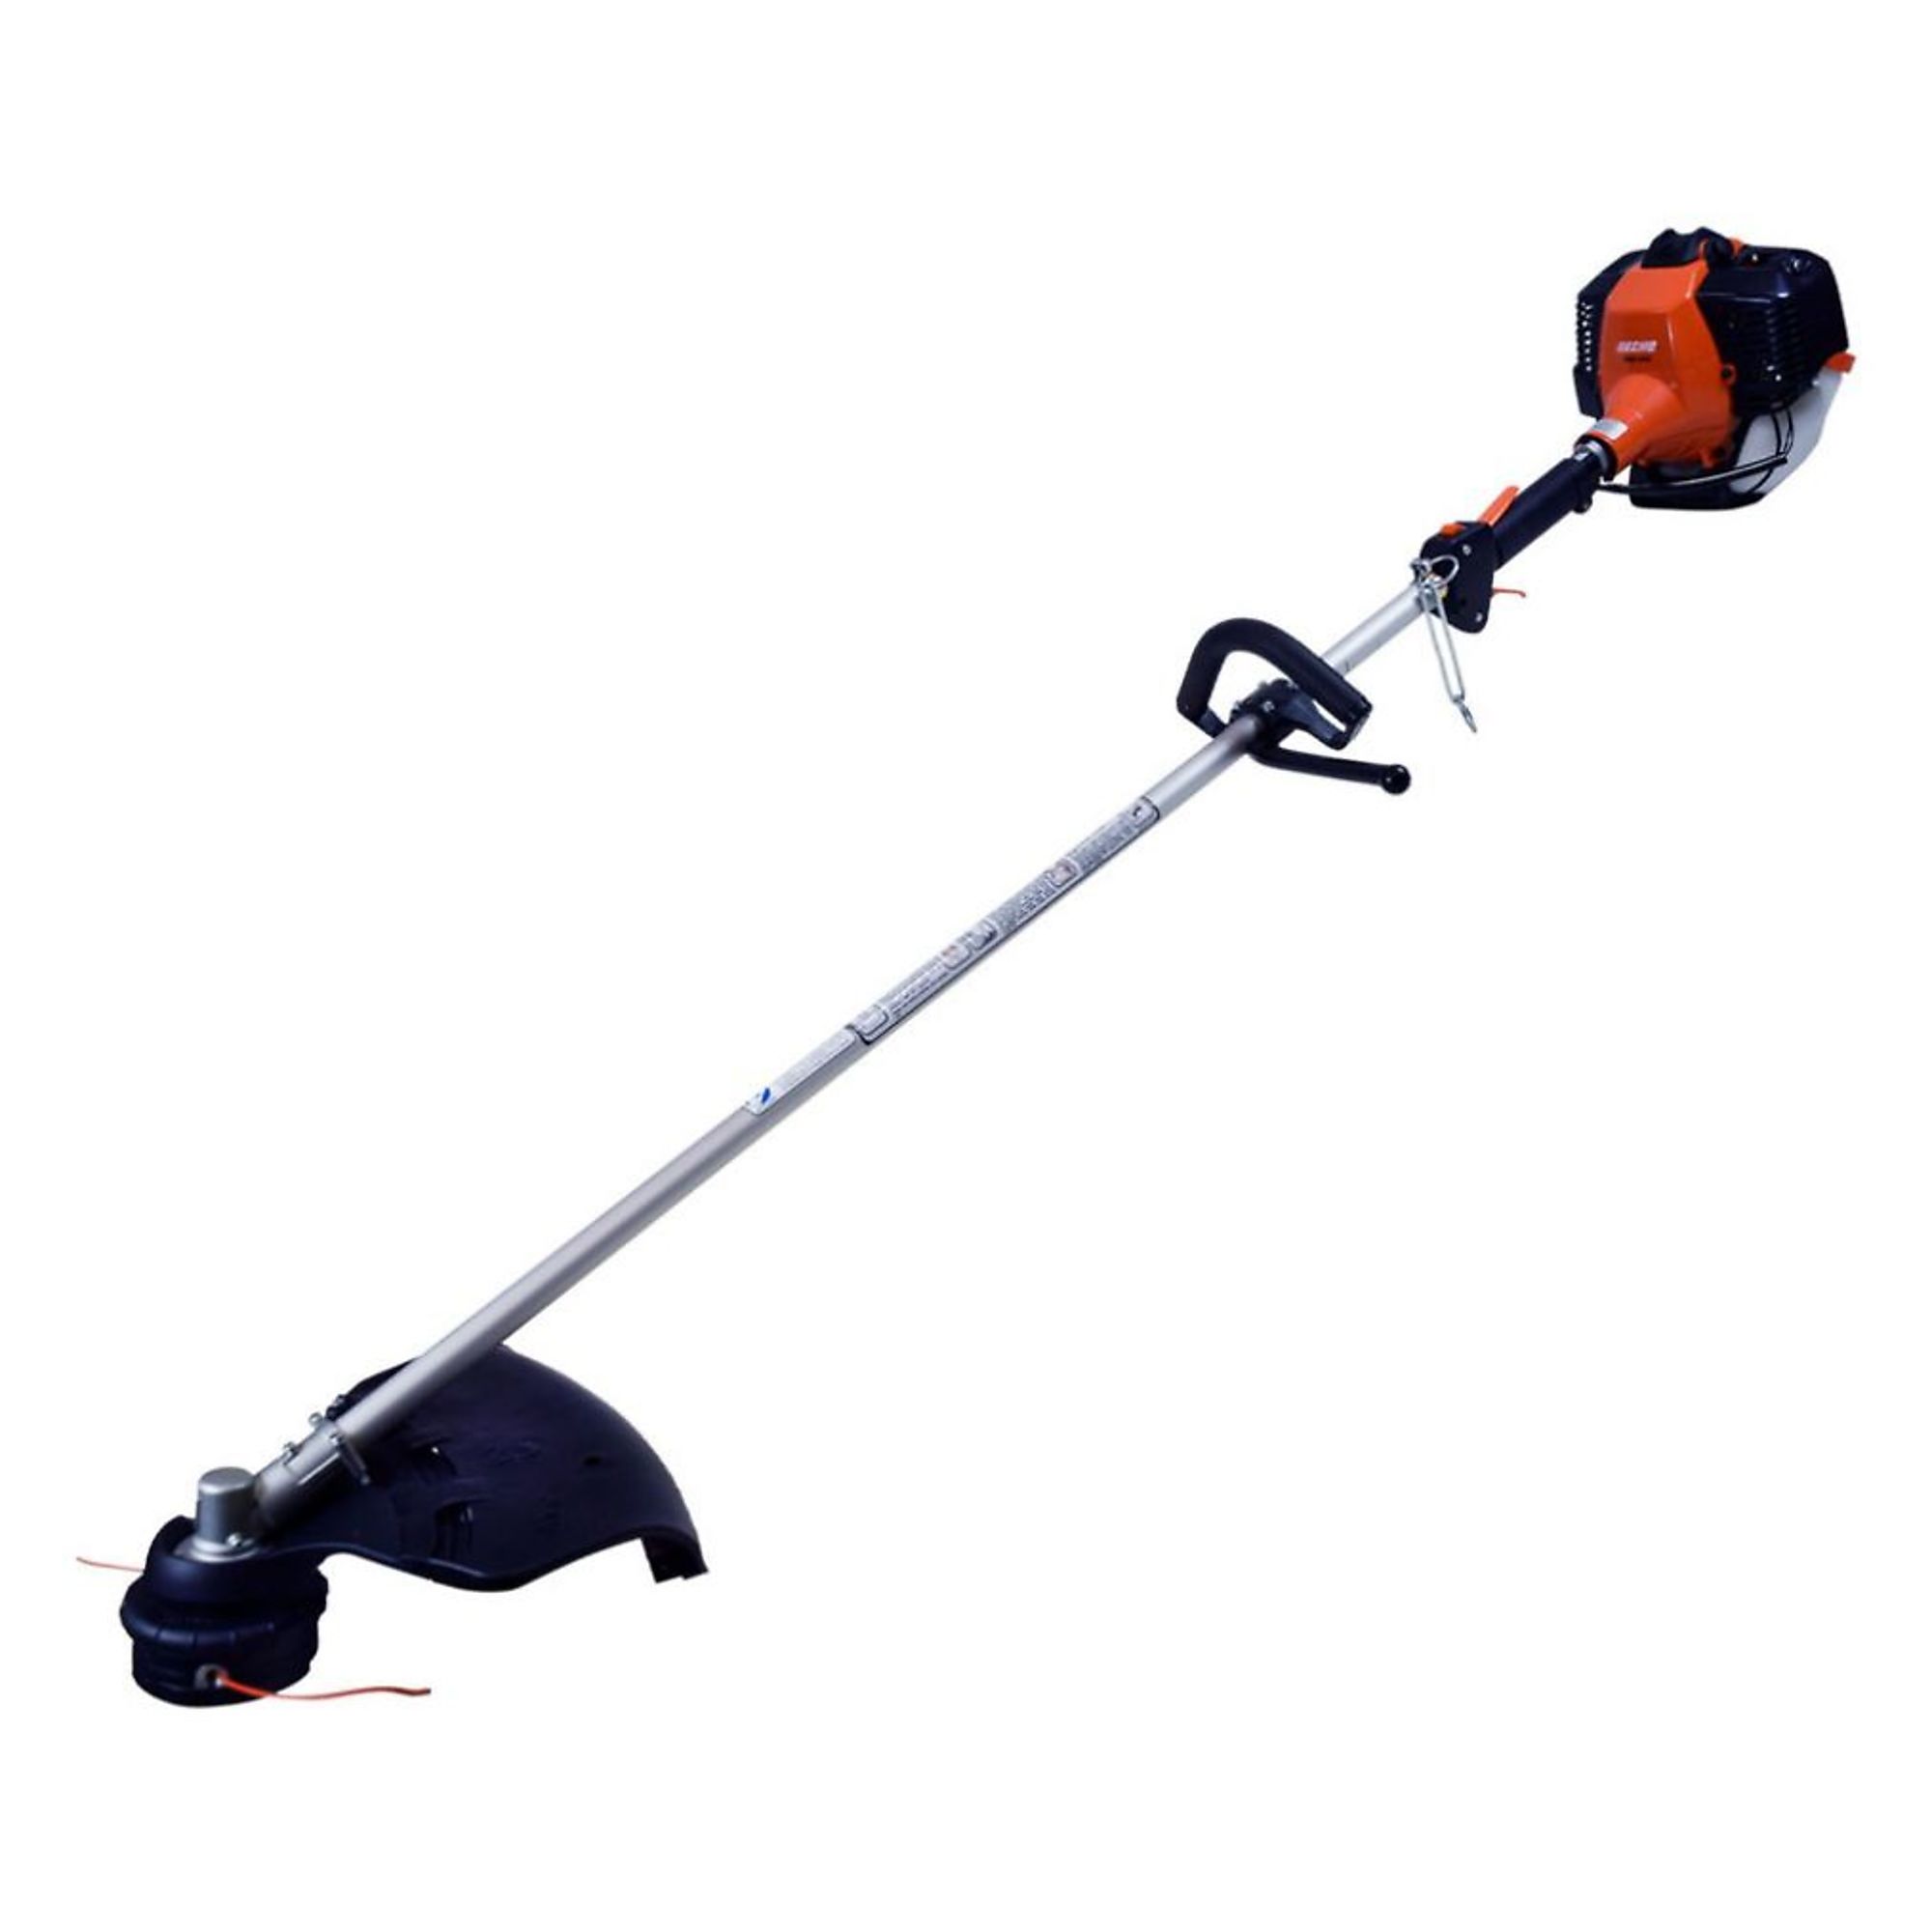 ECHO, Straight Shaft String Trimmer, Primary Power Source Gas, Engine Displacement 42.7 cc, Model SRM-410X